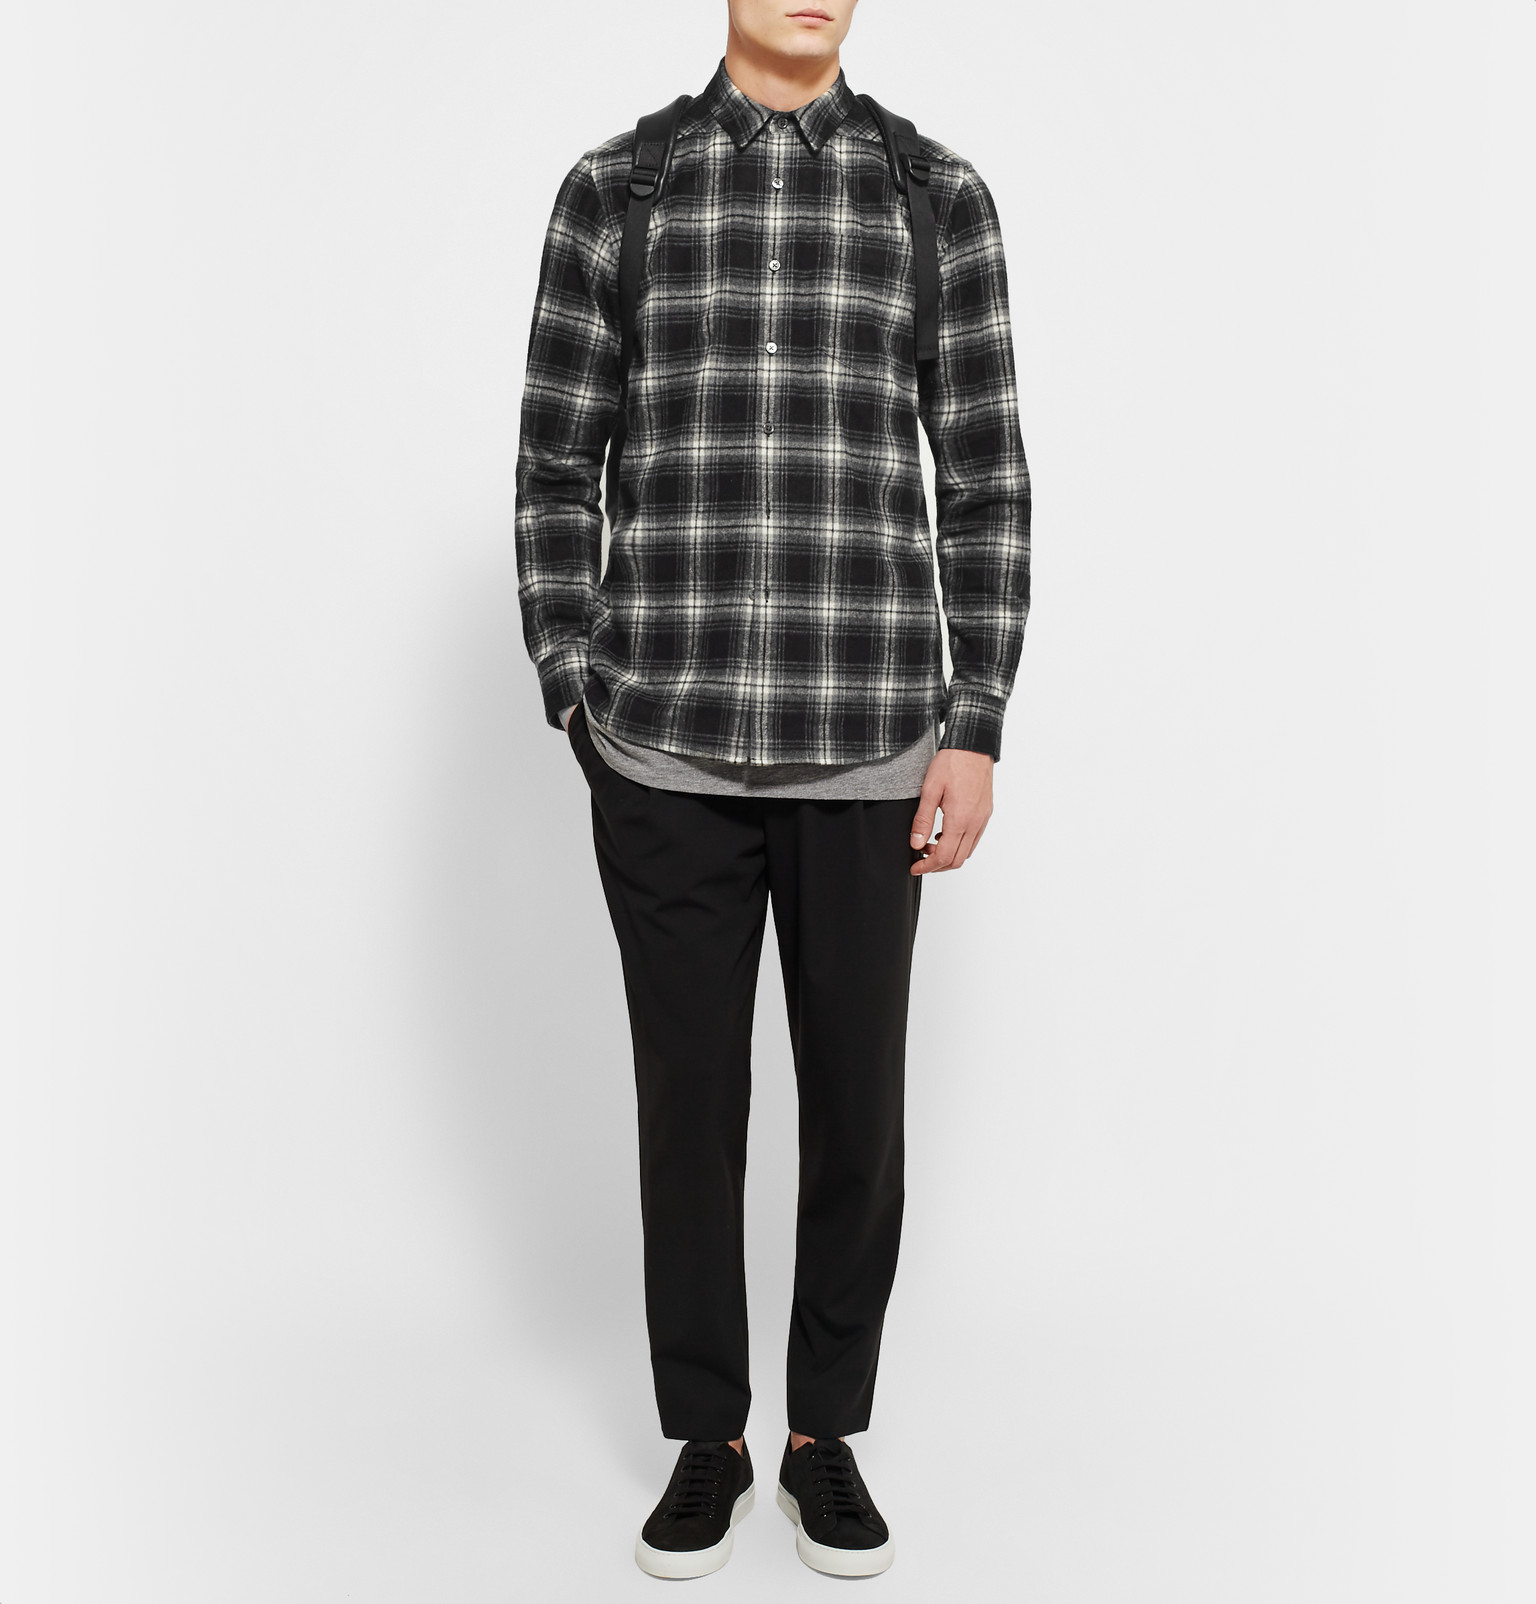 Black White Checked Flannel Roblox Free Roblox Accounts With Robux Discord Server - free roblox shirt template download kaldebwongco